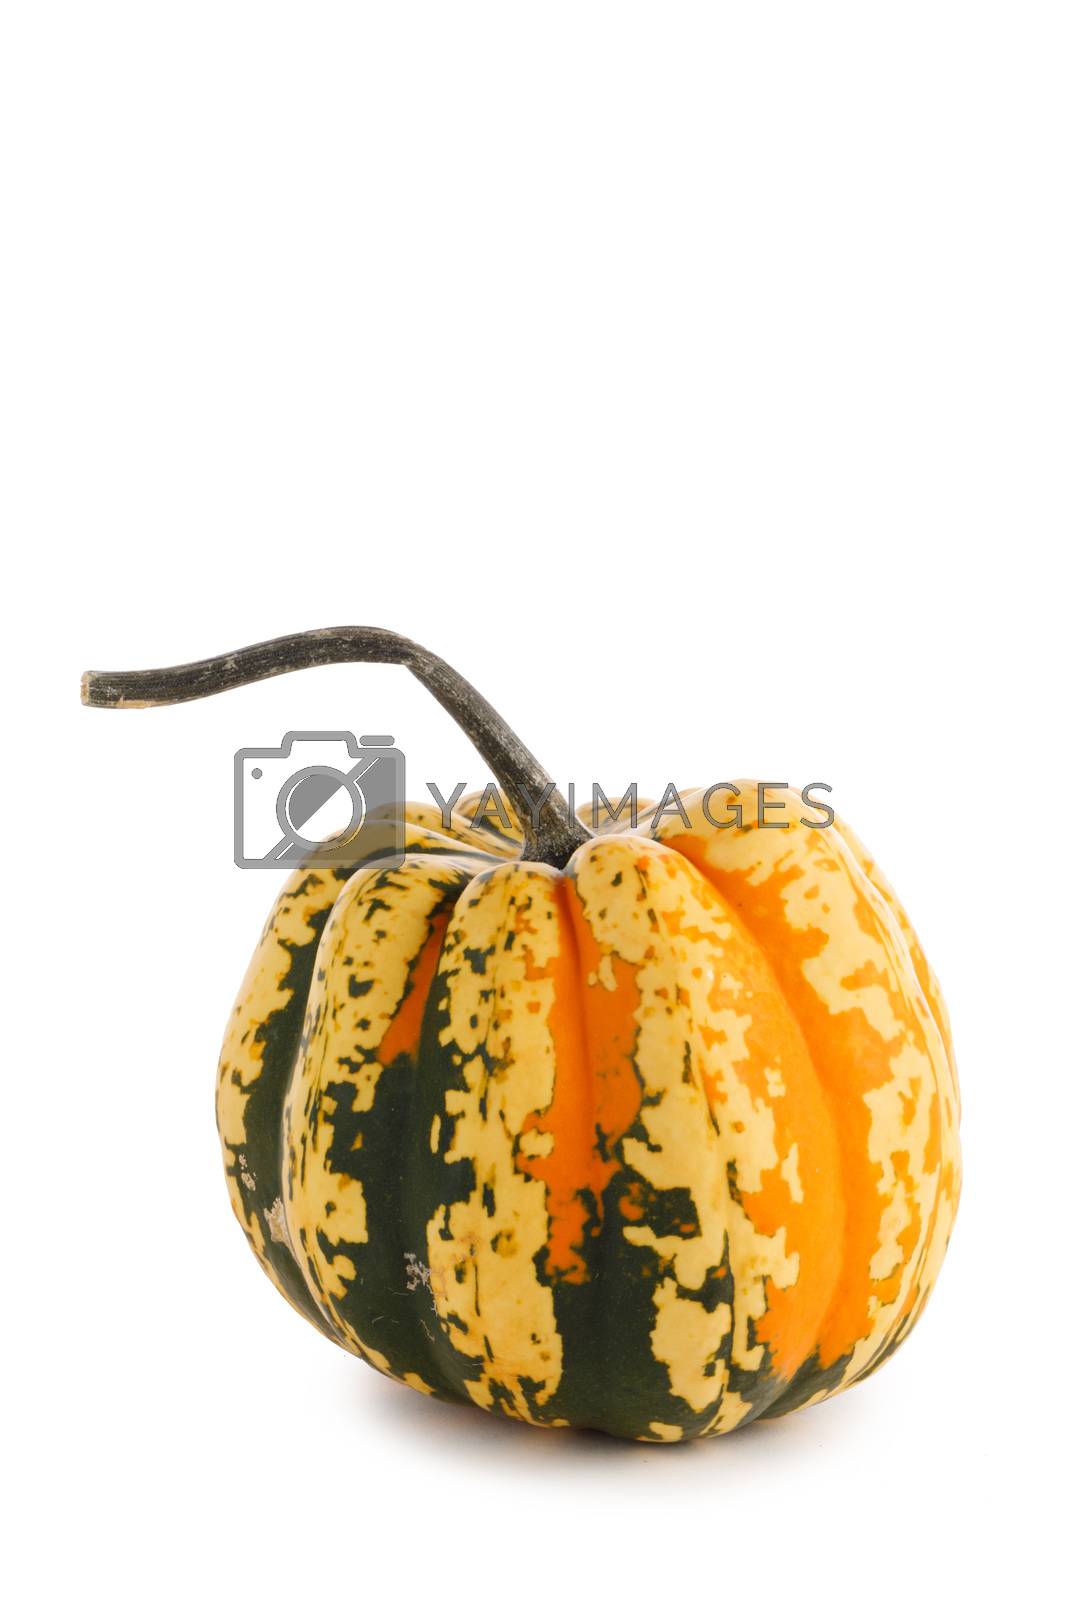 Royalty free image of One striped pumpkin by Yellowj